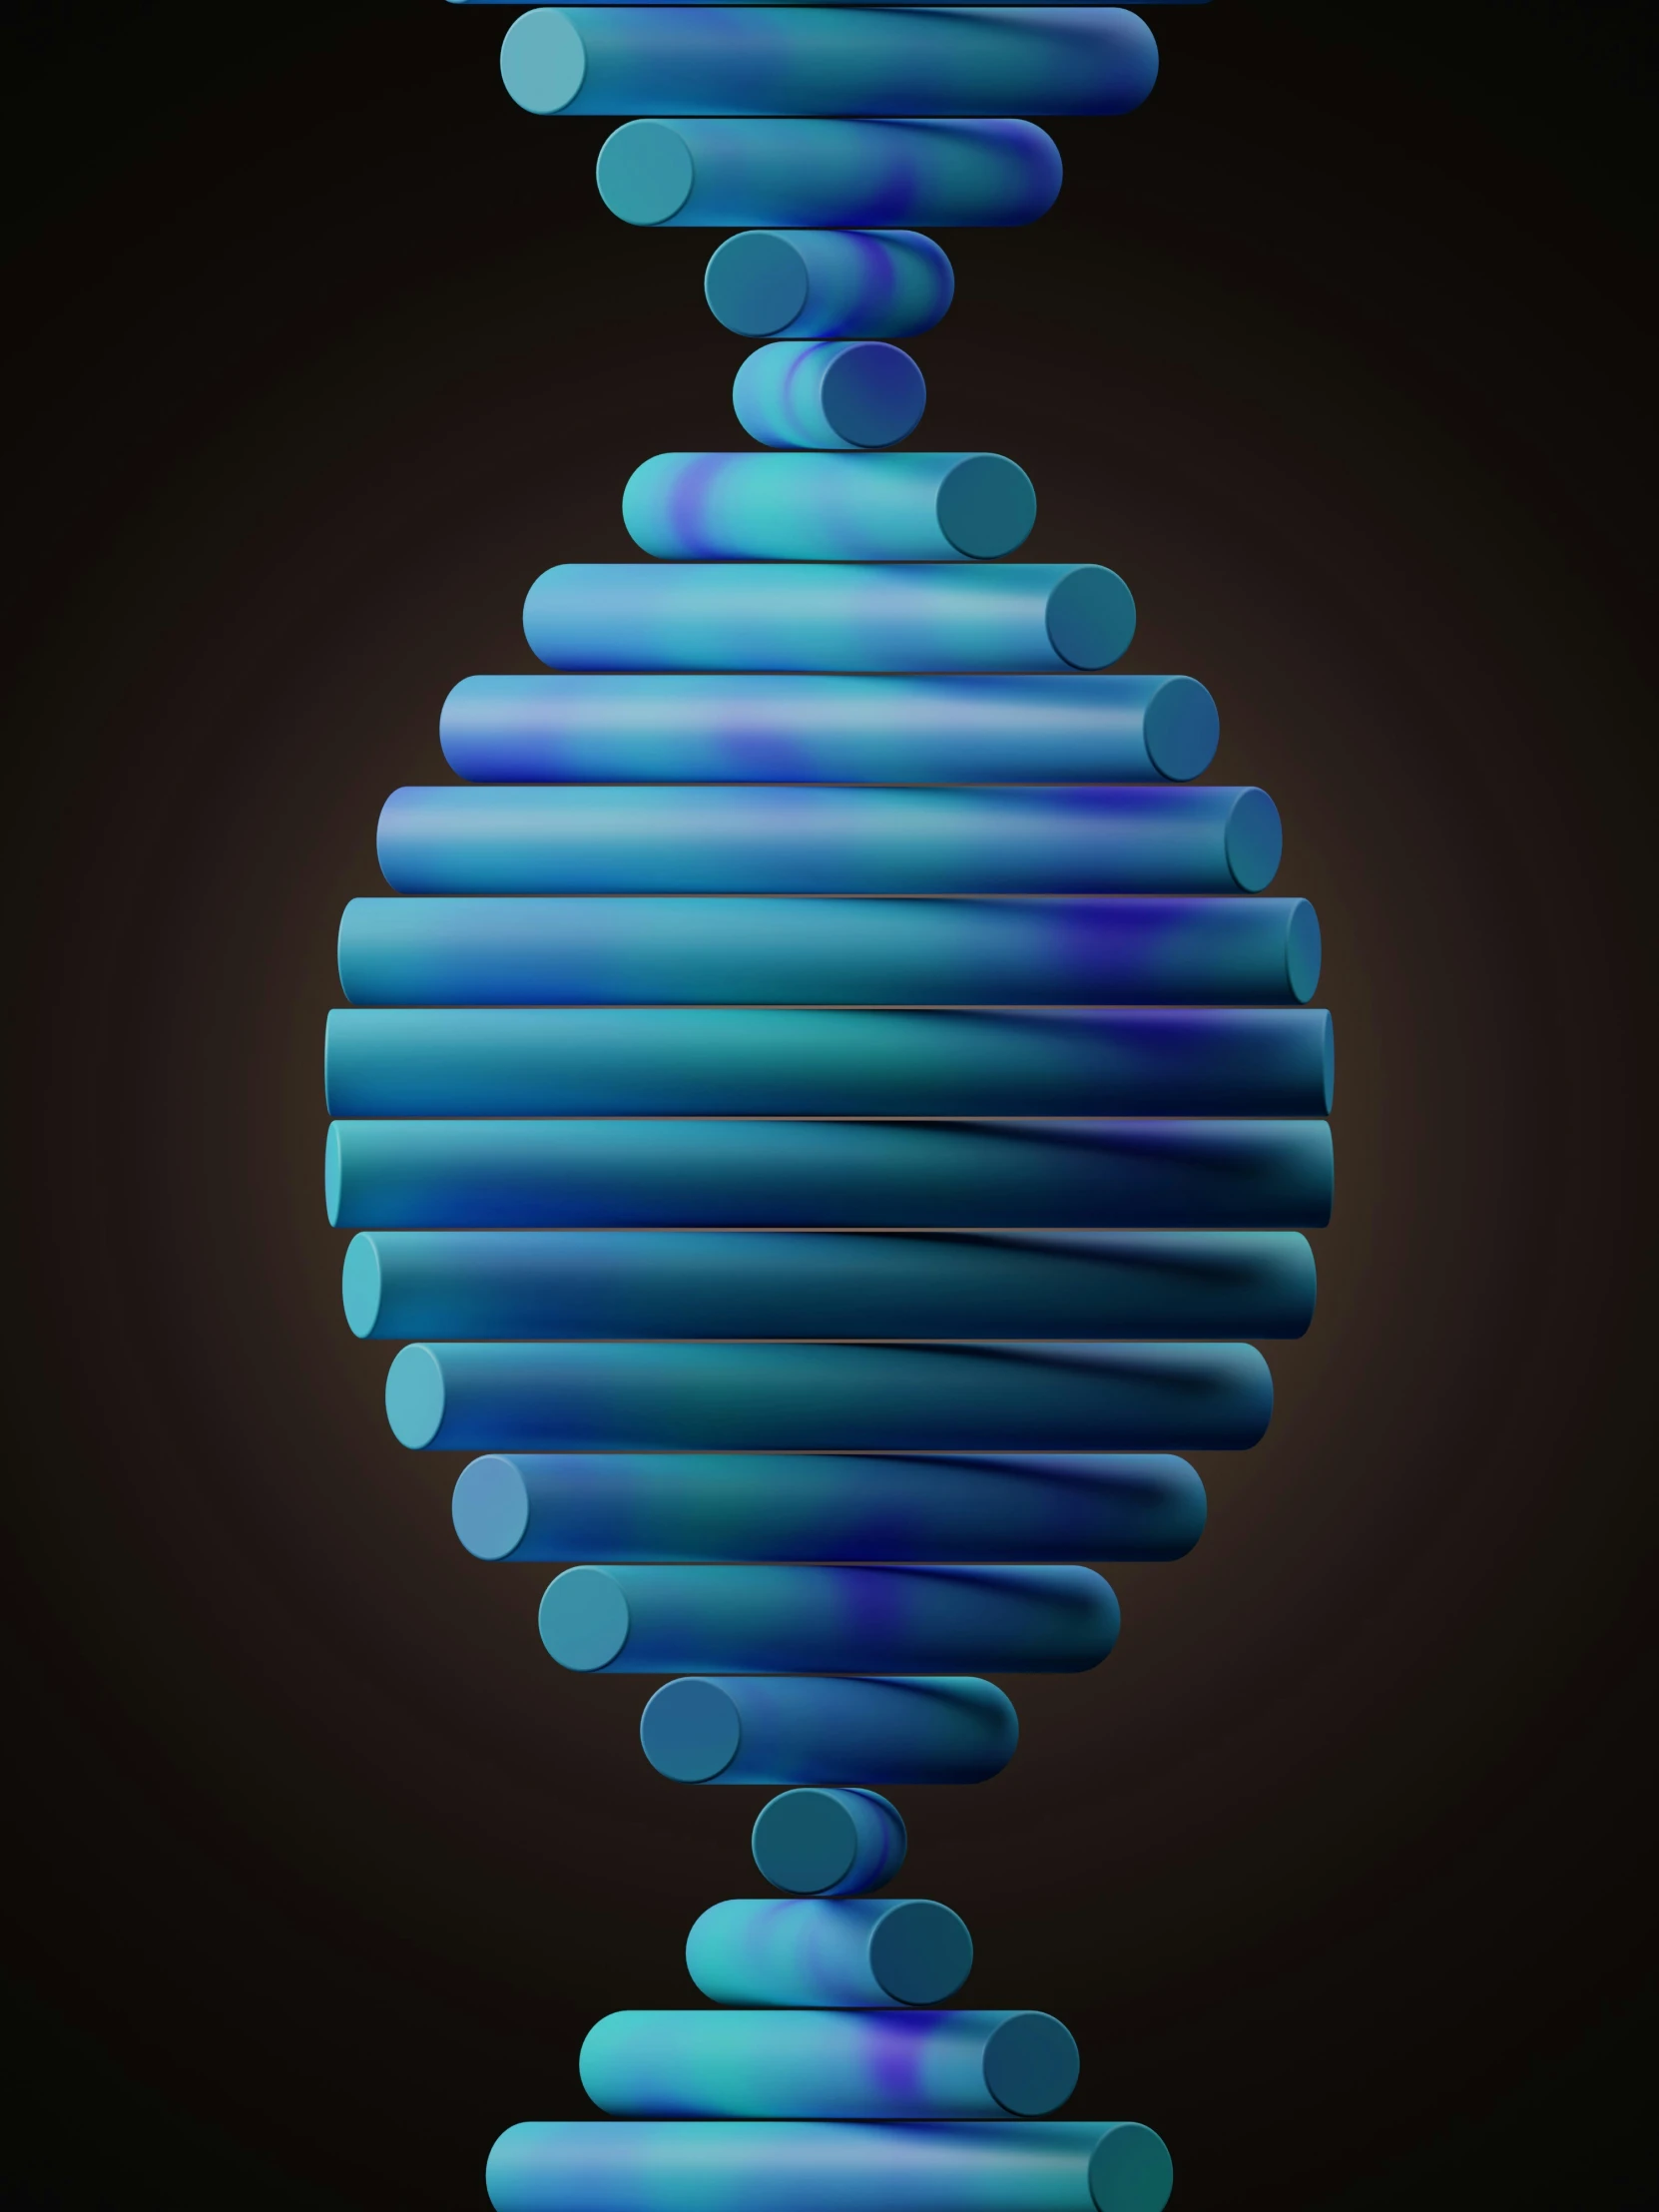 an abstract, artistic poster with blue circles